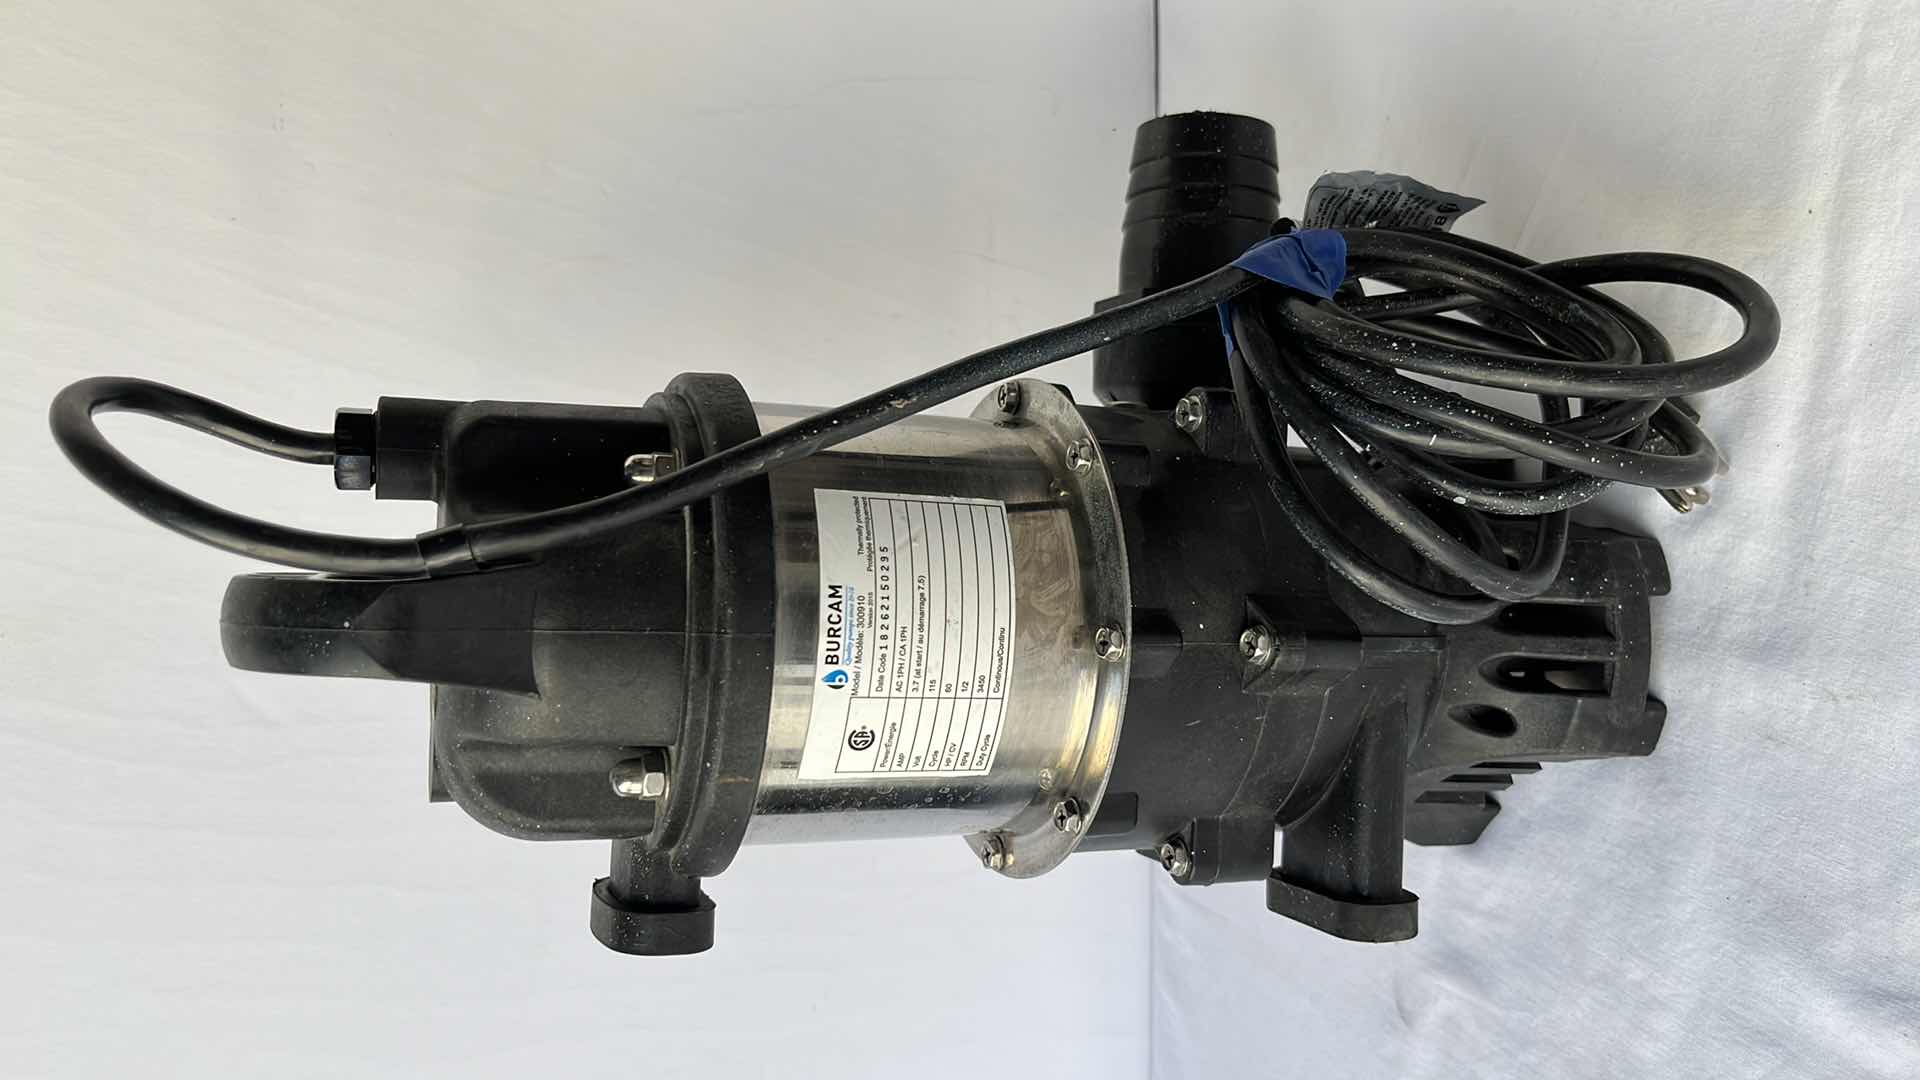 Photo 4 of 1/2HP SUBM. WATERFALL PUMP
CONTINUOUS DUTY 115V (MODEL 300910)